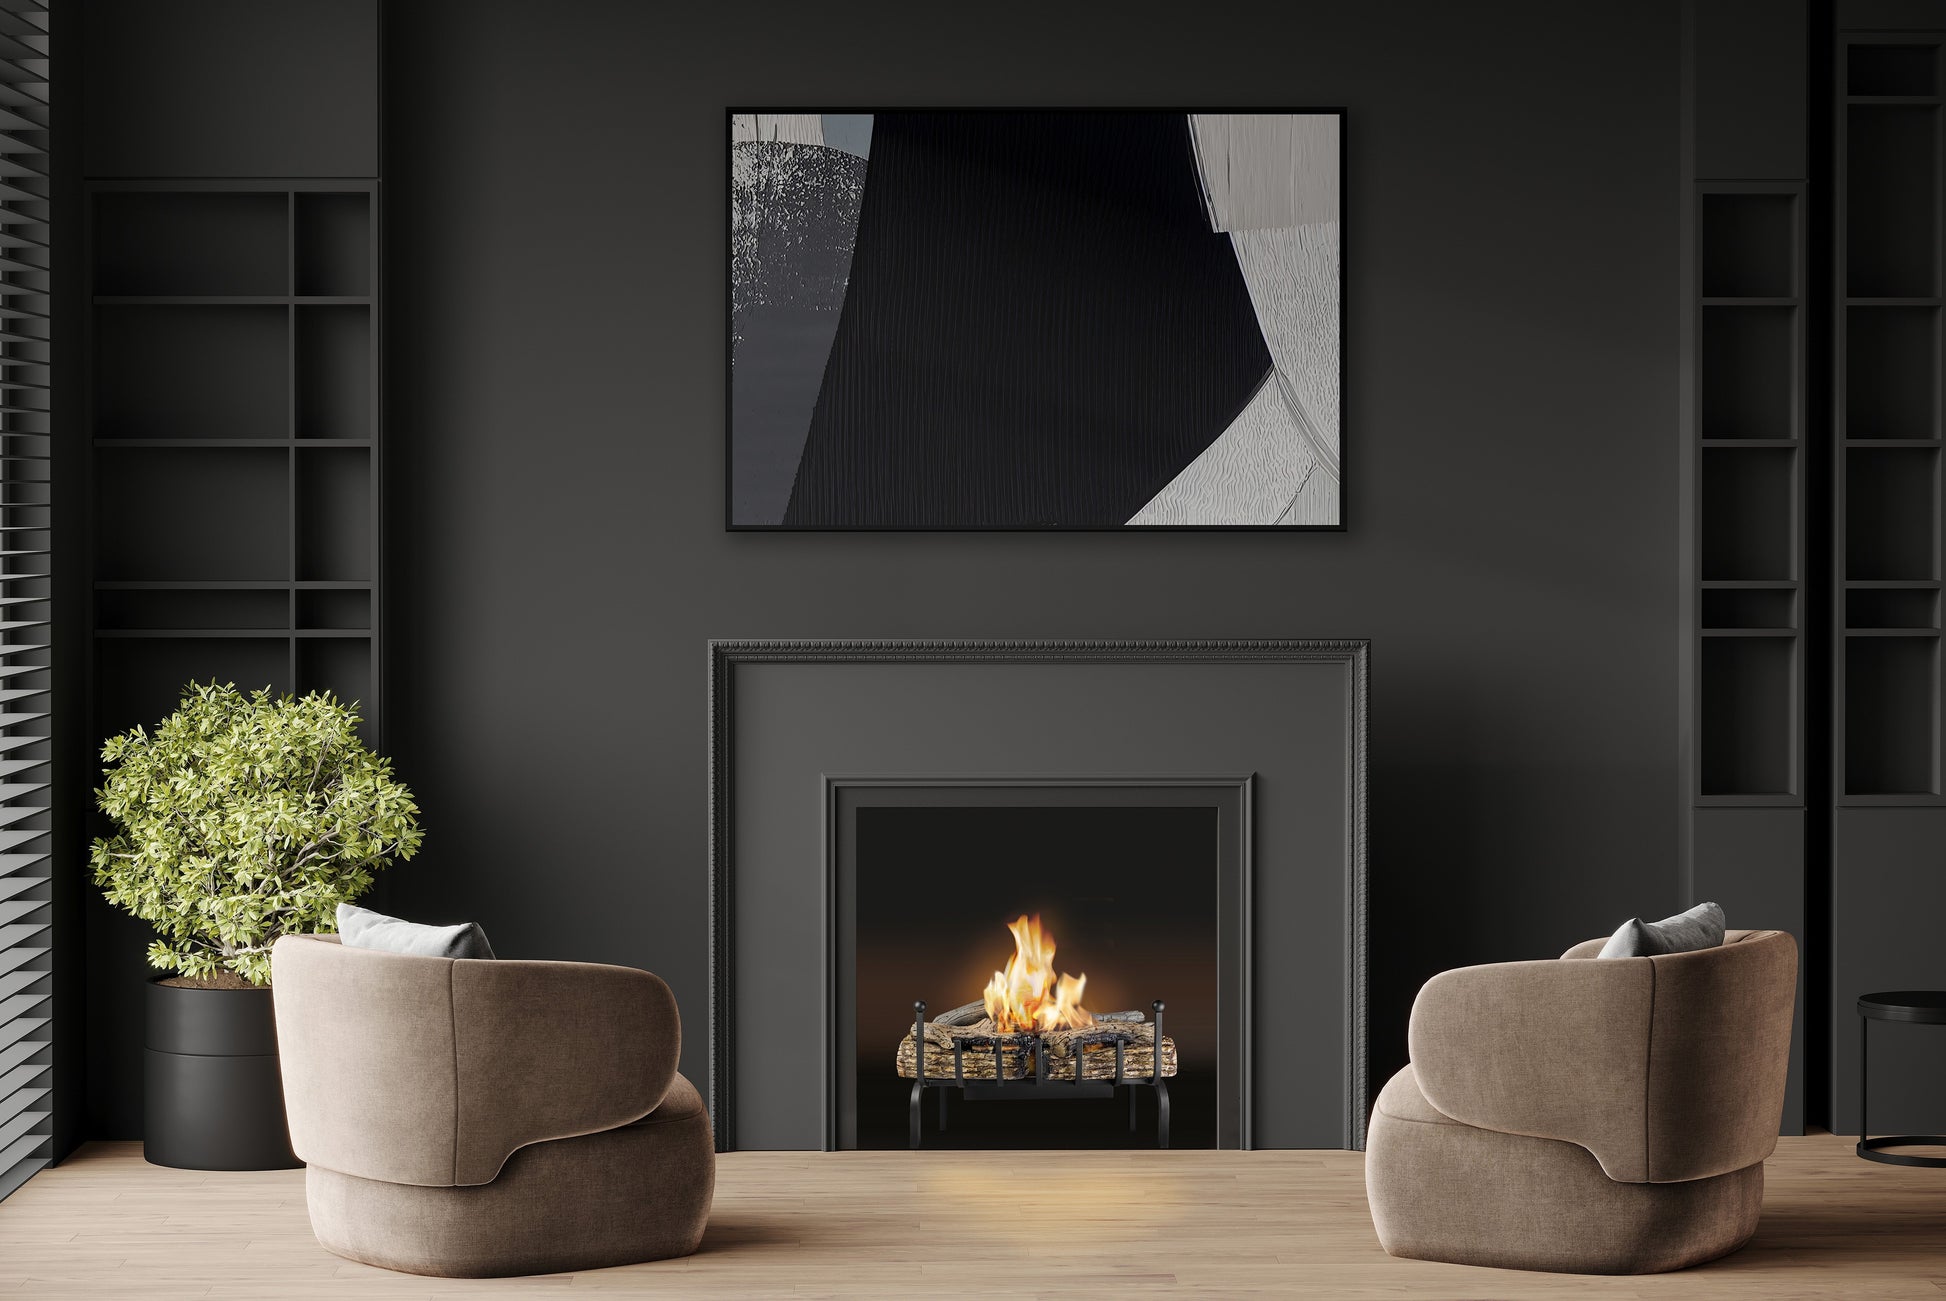 VERMONT Bioethanol Grate in living room with black mantel piece and artwork above